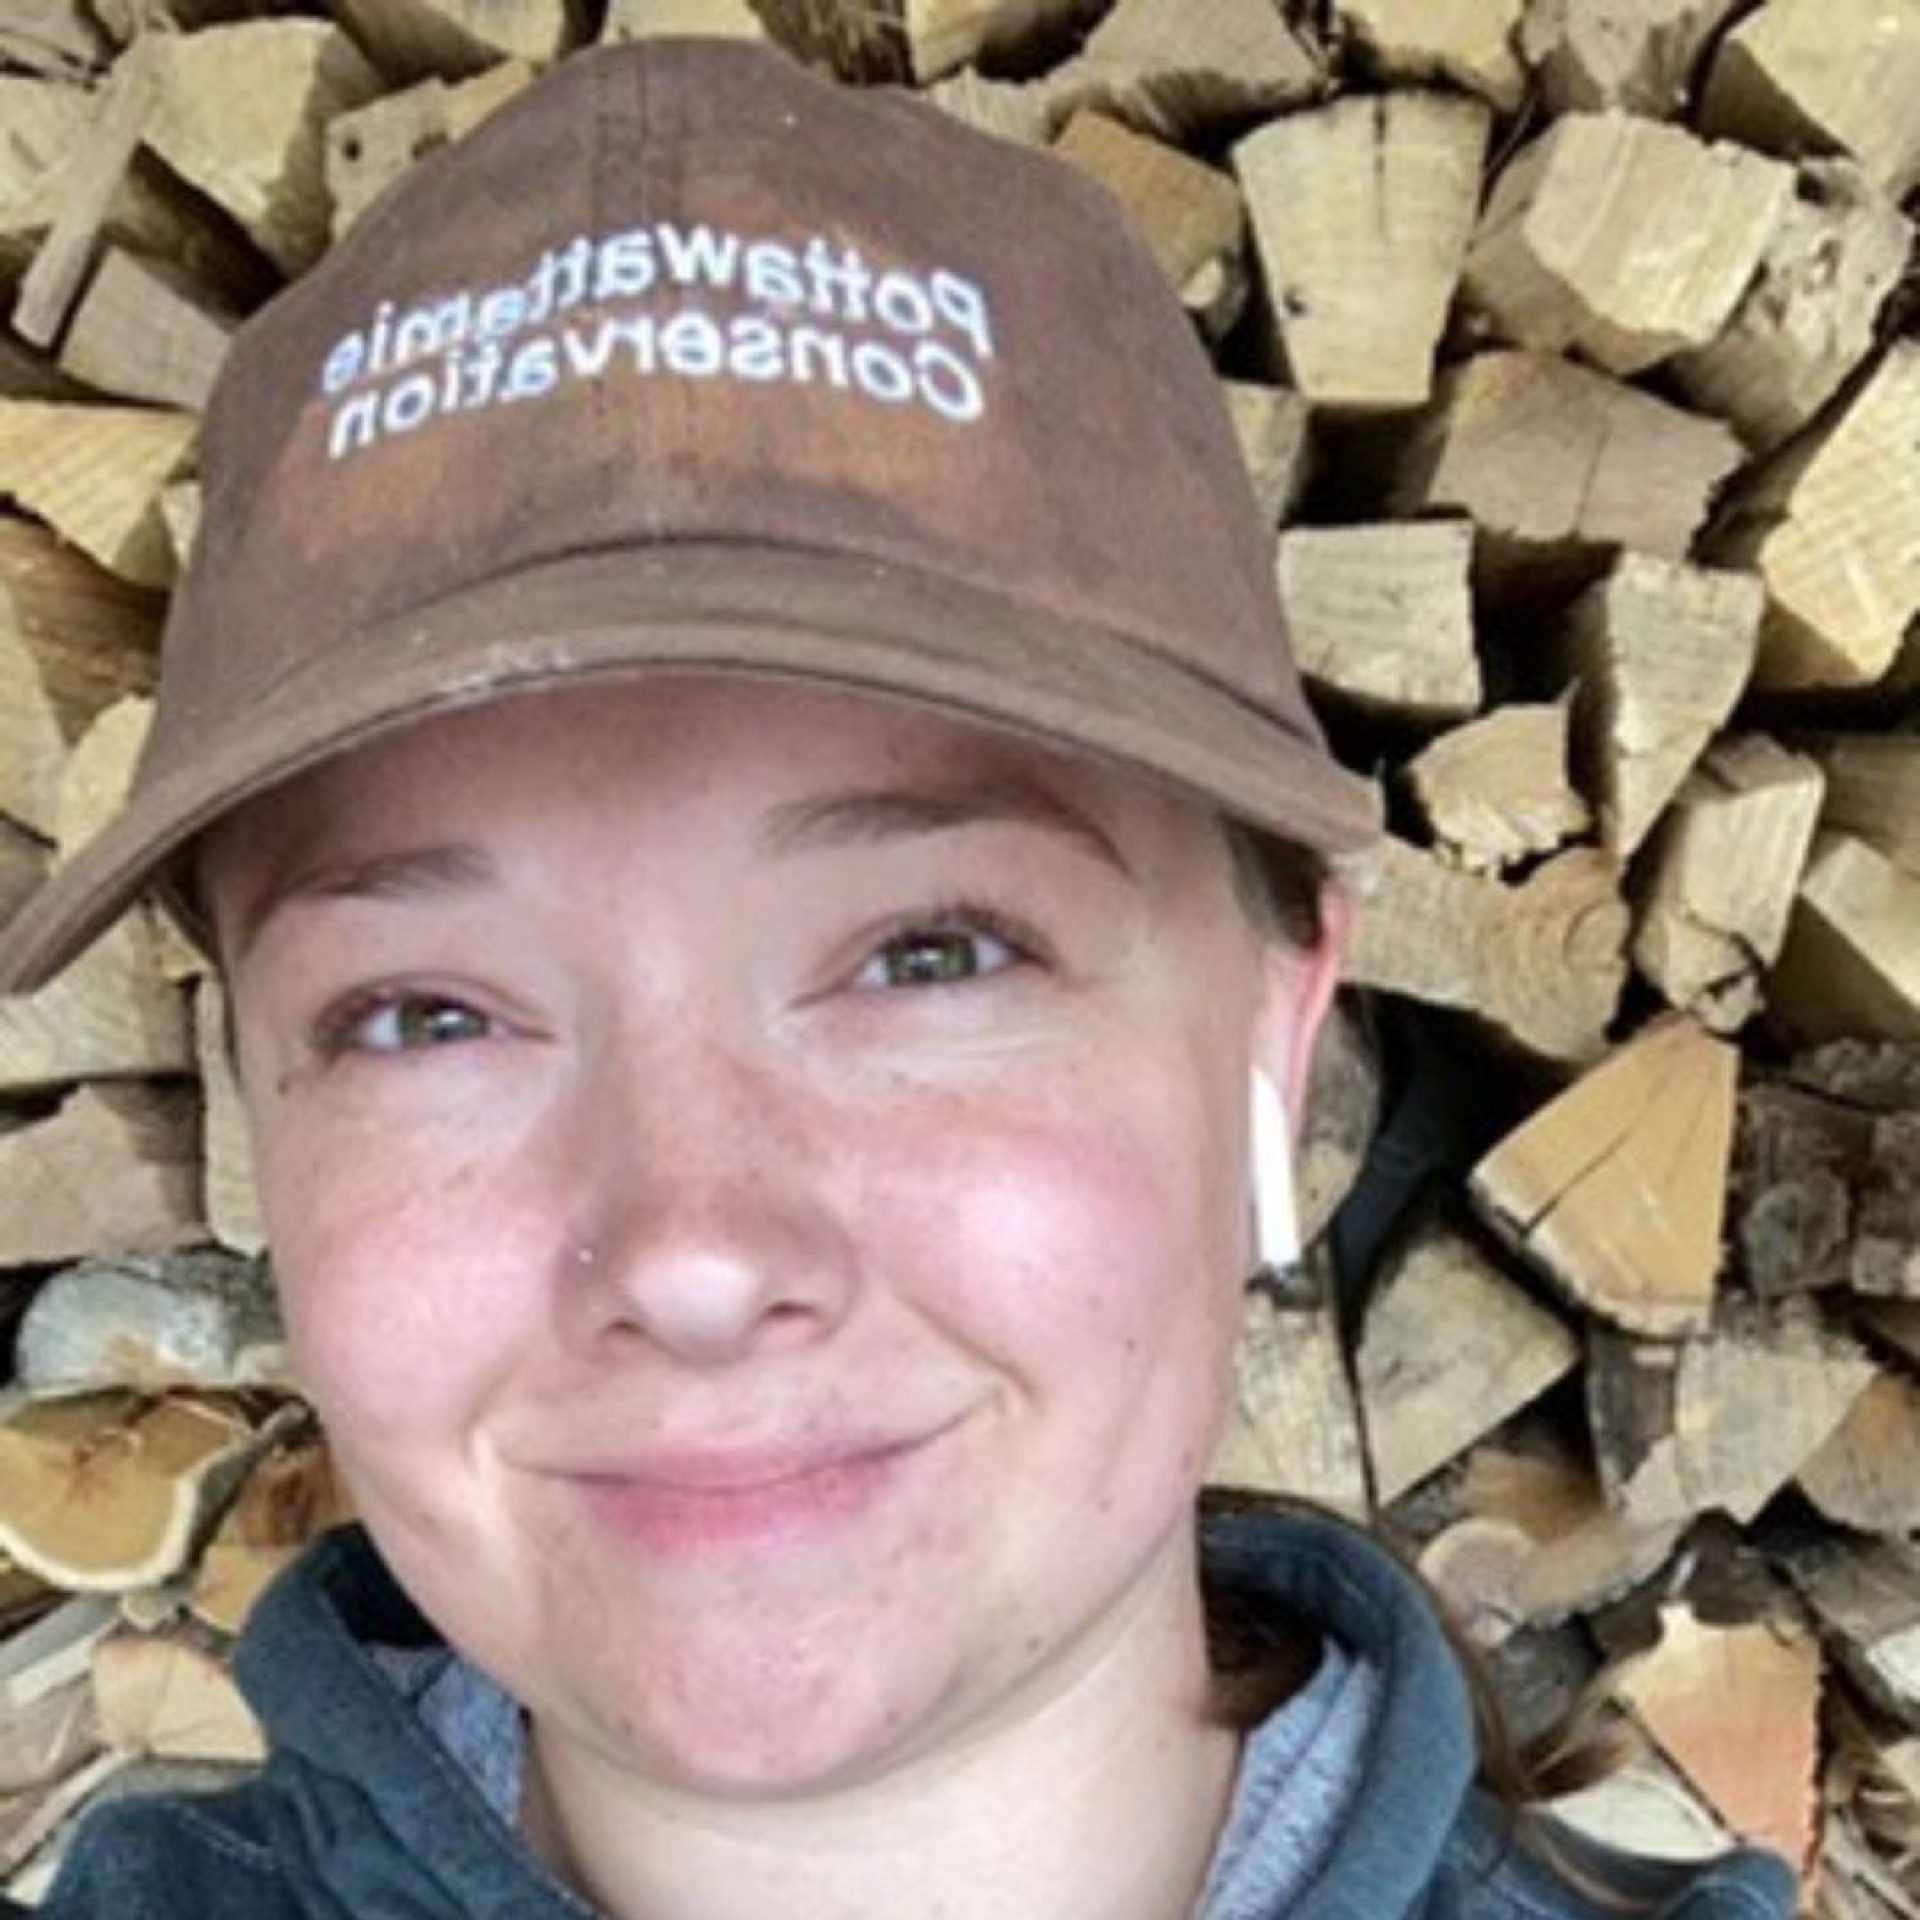 Park Ranger Intern chopping firewood for the campground.